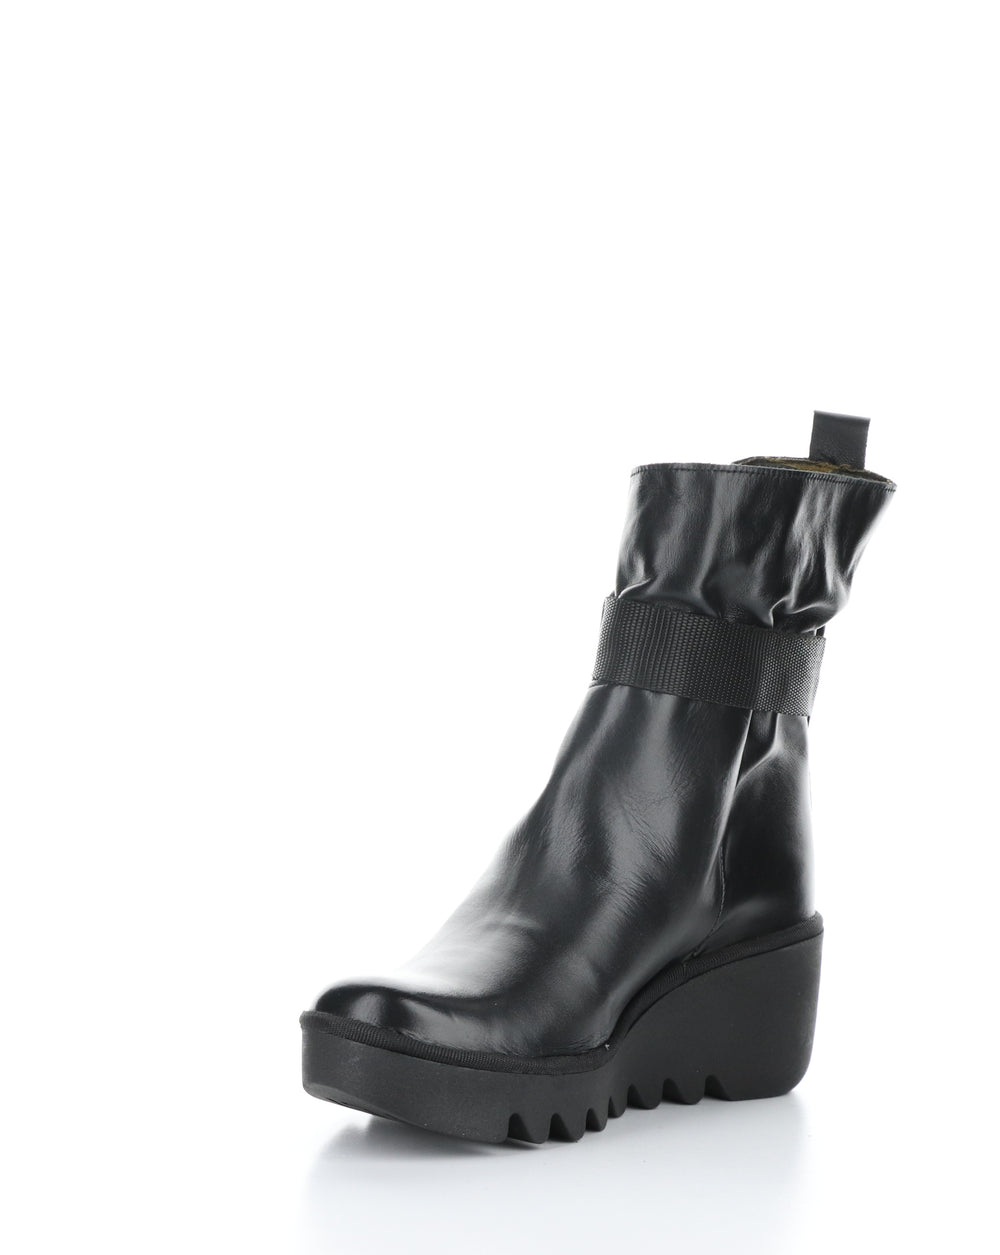 BLIT453FLY 000 BLACK Round Toe Boots